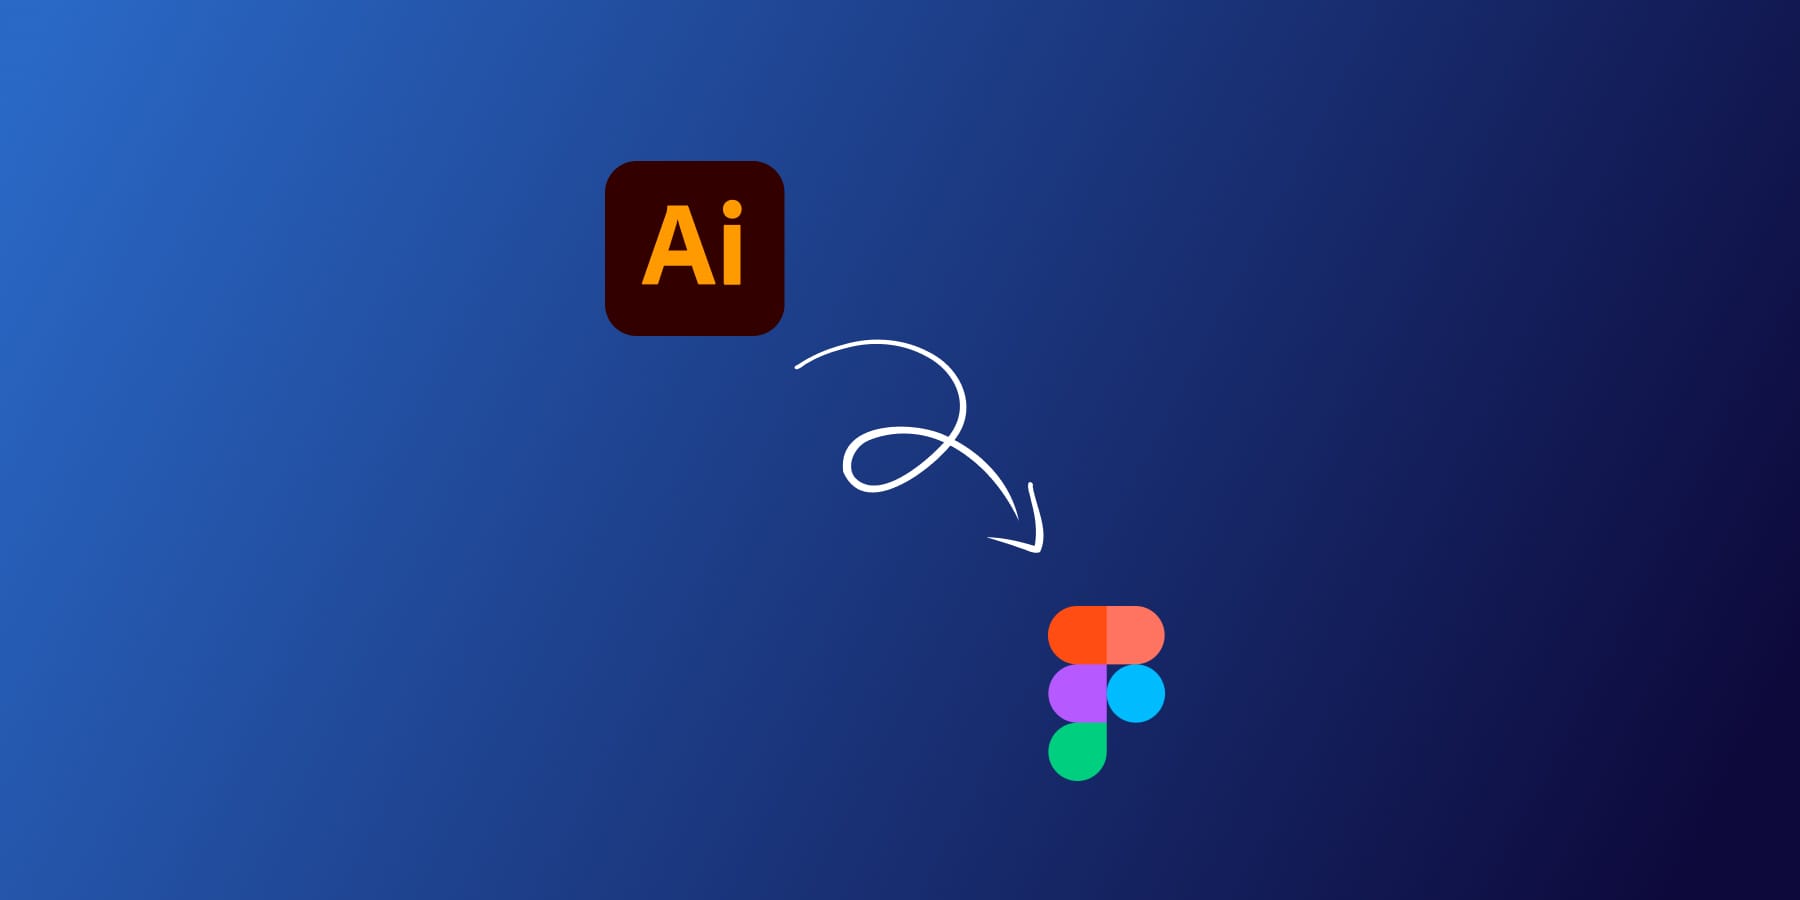 Here’s How to Import Adobe Illustrator Files to Figma